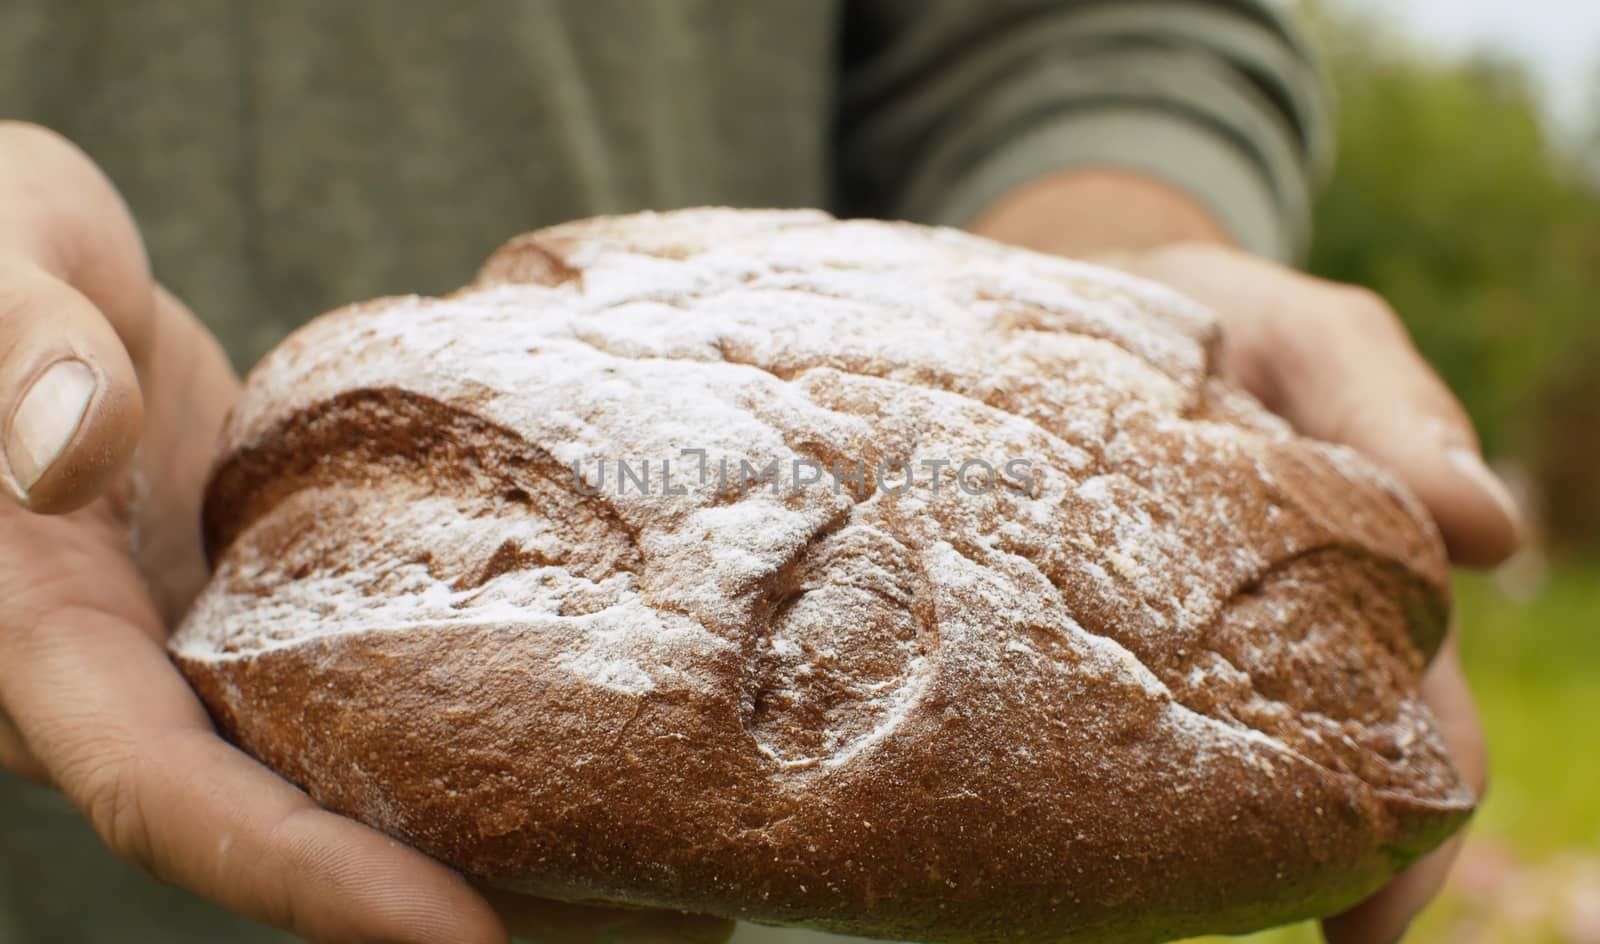 Close up homemade bread in farmers hands in the garden at summer. Natural organic handmade food